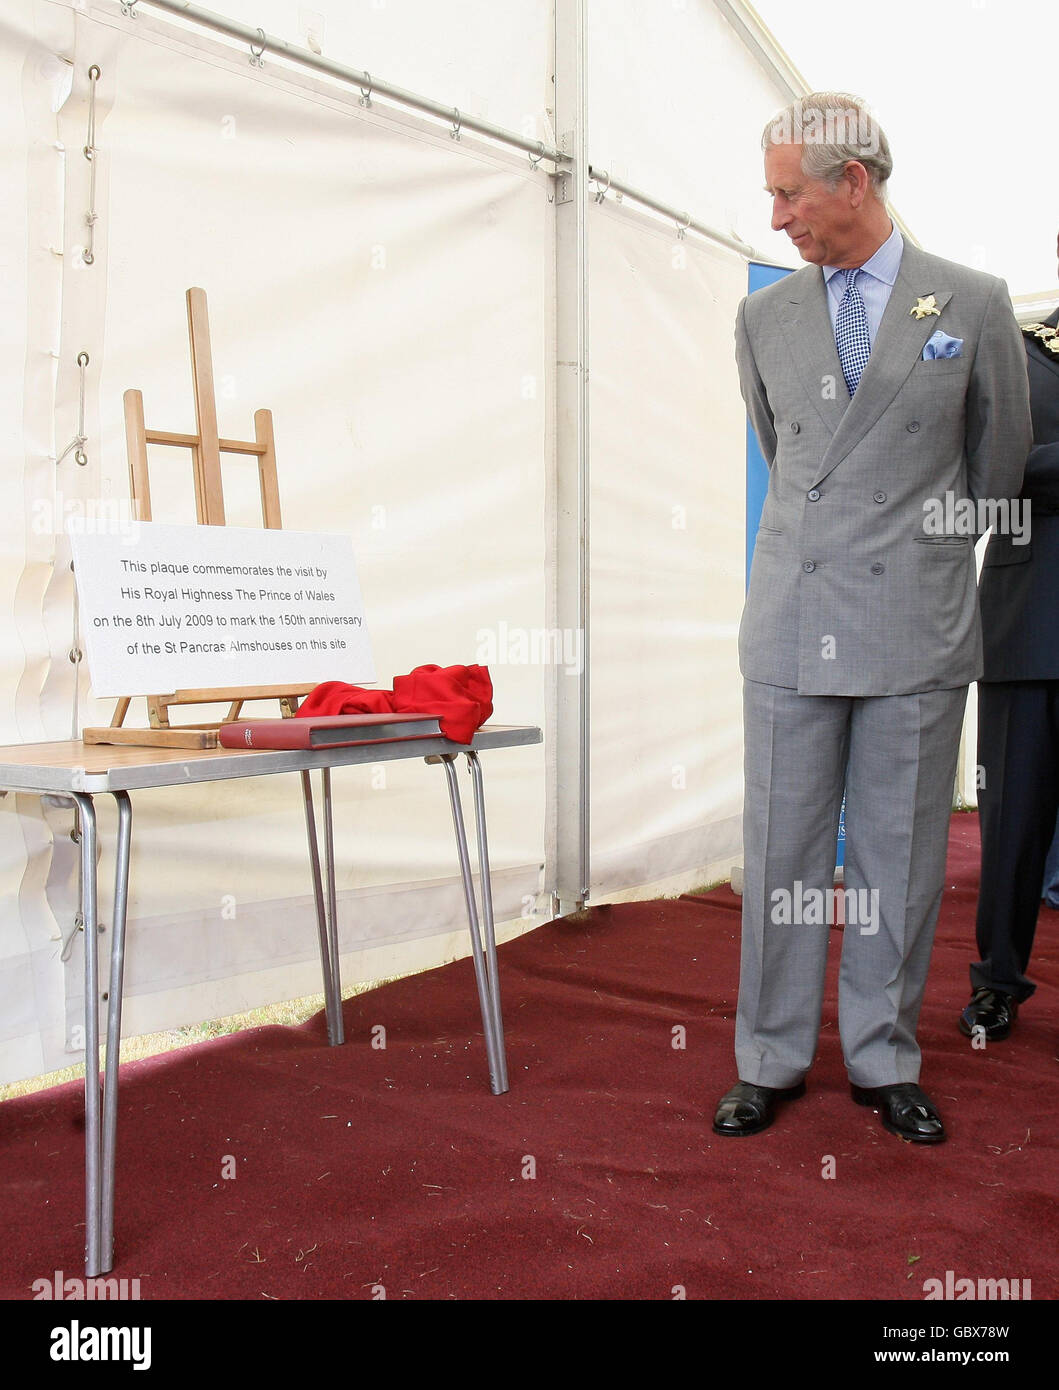 The Prince of Wales, patron of the Almshouse Association, unveils a plaque, during a visit to St Pancras almshouses in north London to celebrate the 150th anniversary of the Almshouses. Stock Photo